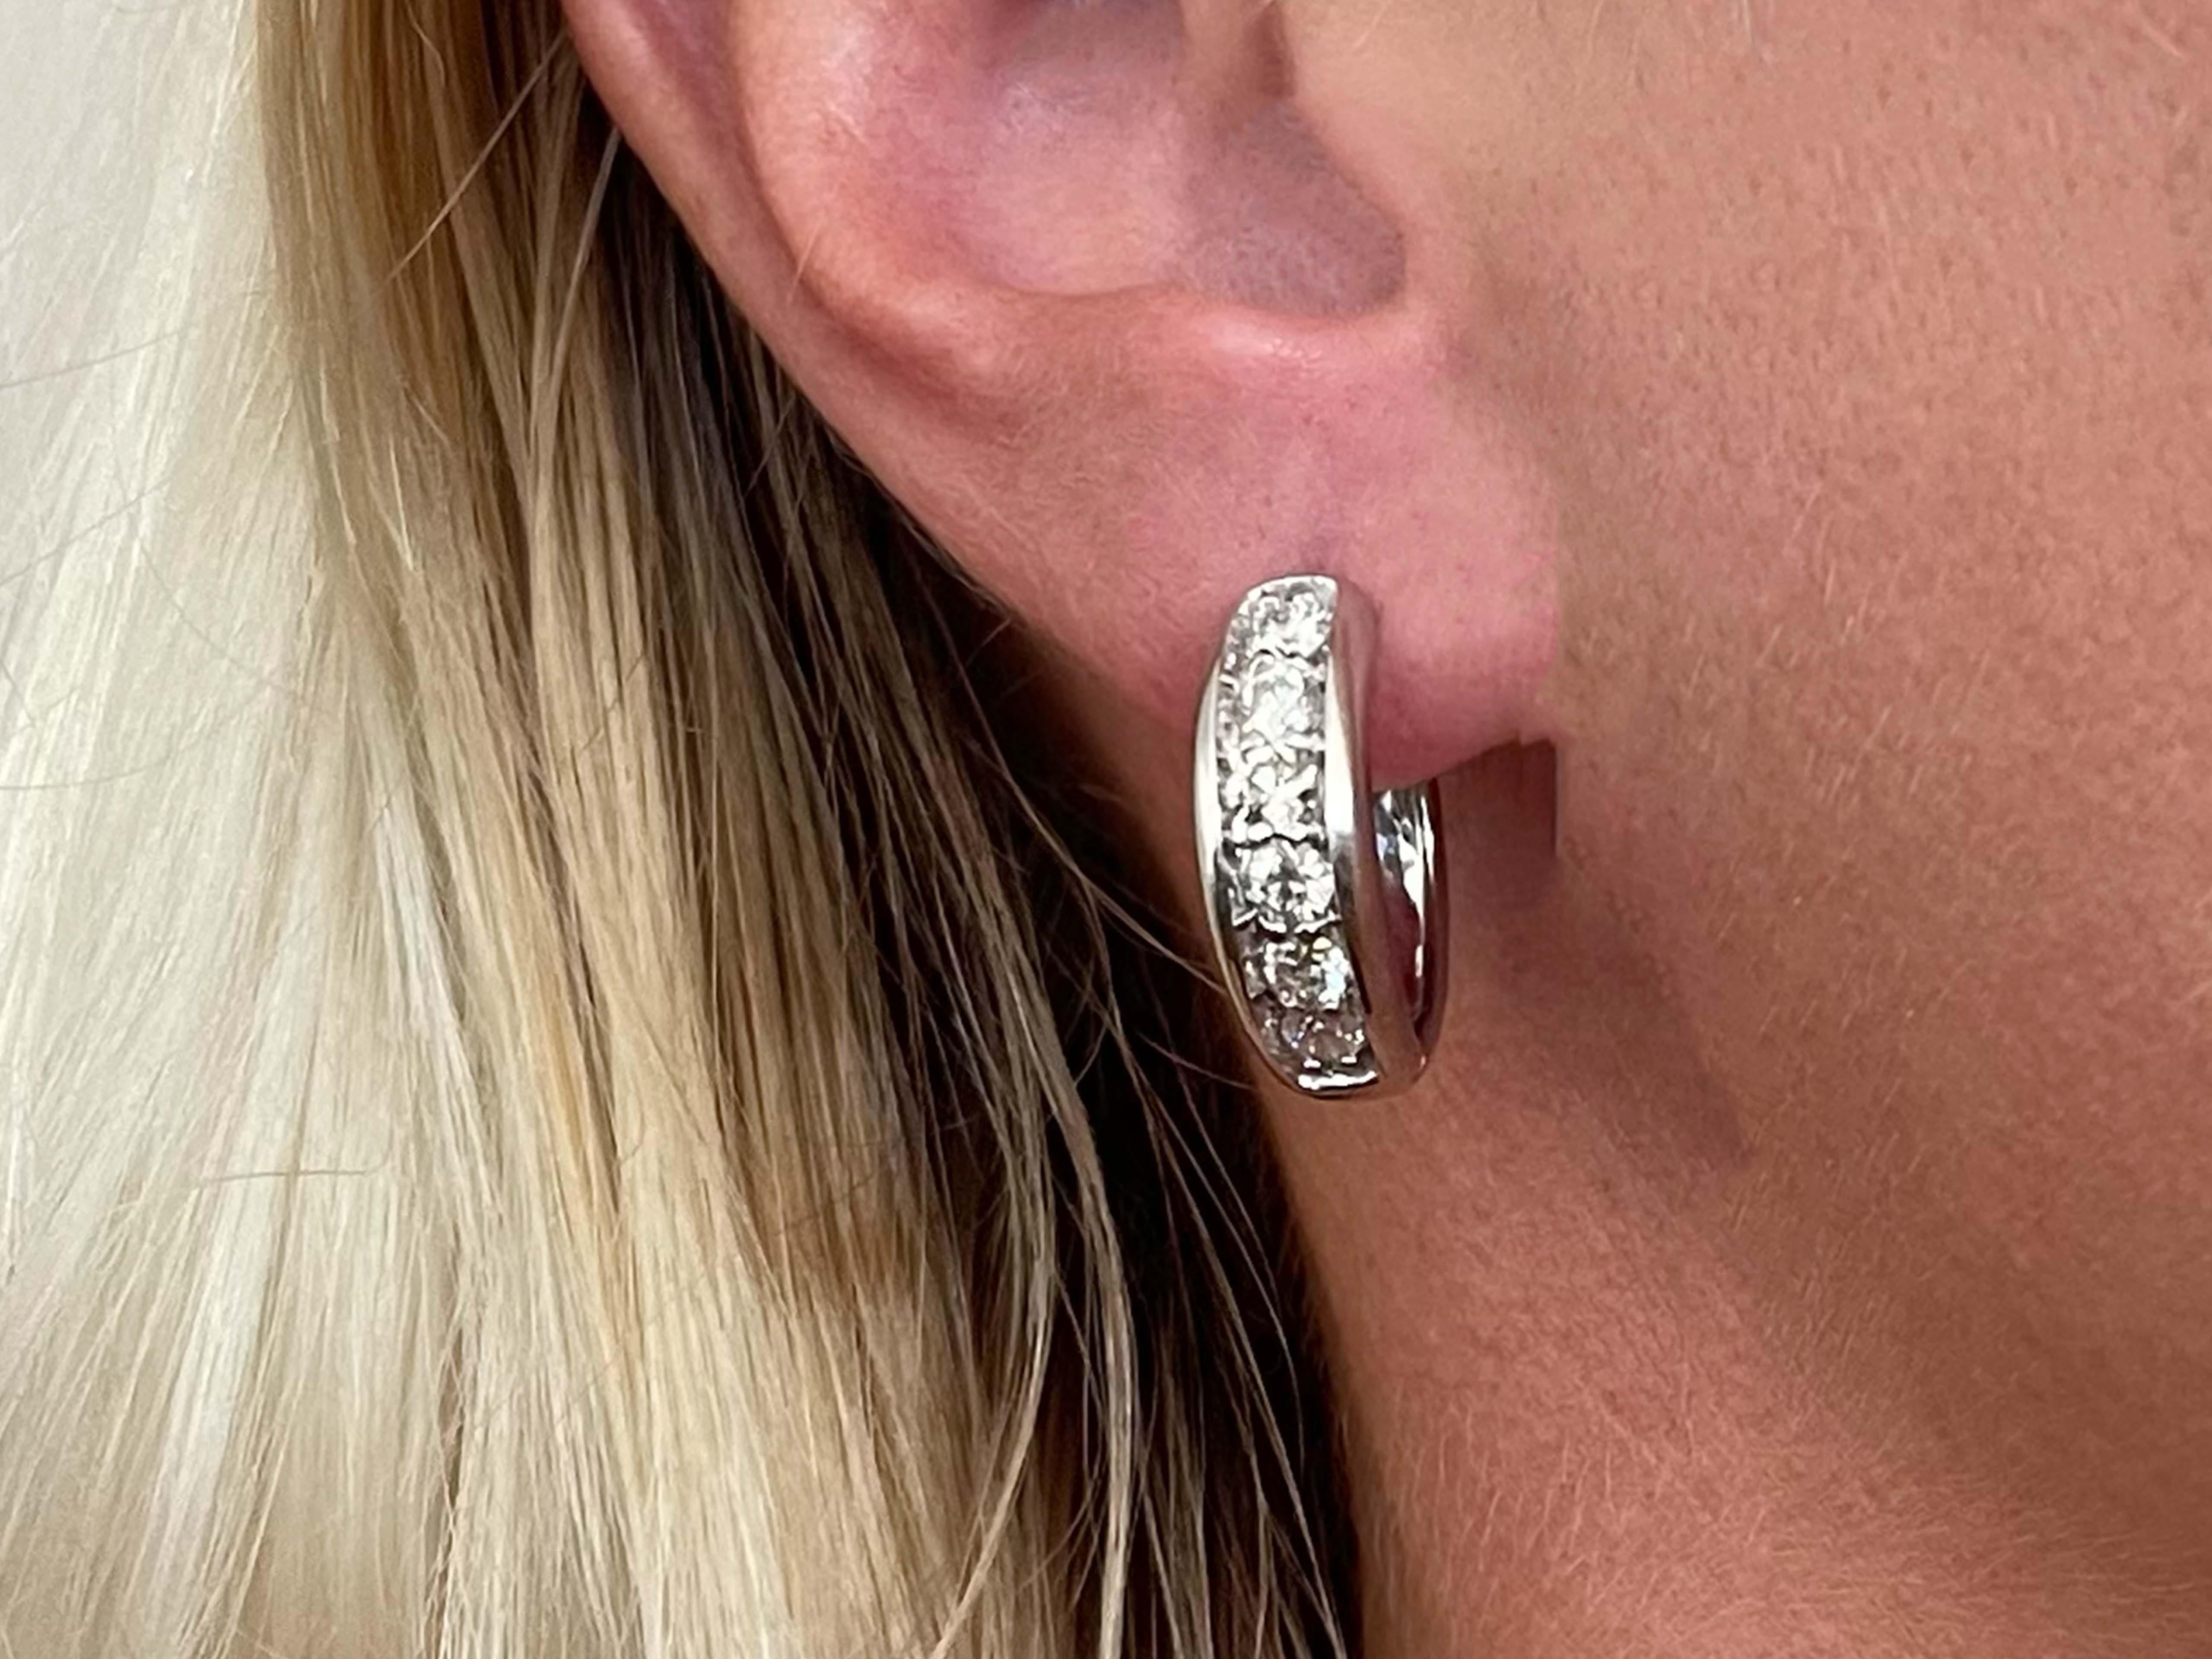 Earrings Specifications:

Style: Diamond Hoop Earrings

Metal: 10k White Gold

Total Weight: 8.7 Grams

Measurements: 21 mm 

Diamonds: 12 Round Brilliant Cut Diamonds

Diamond Setting: Prong

Diamond Color: G-H

Diamond Clarity: SI1-I1

Total